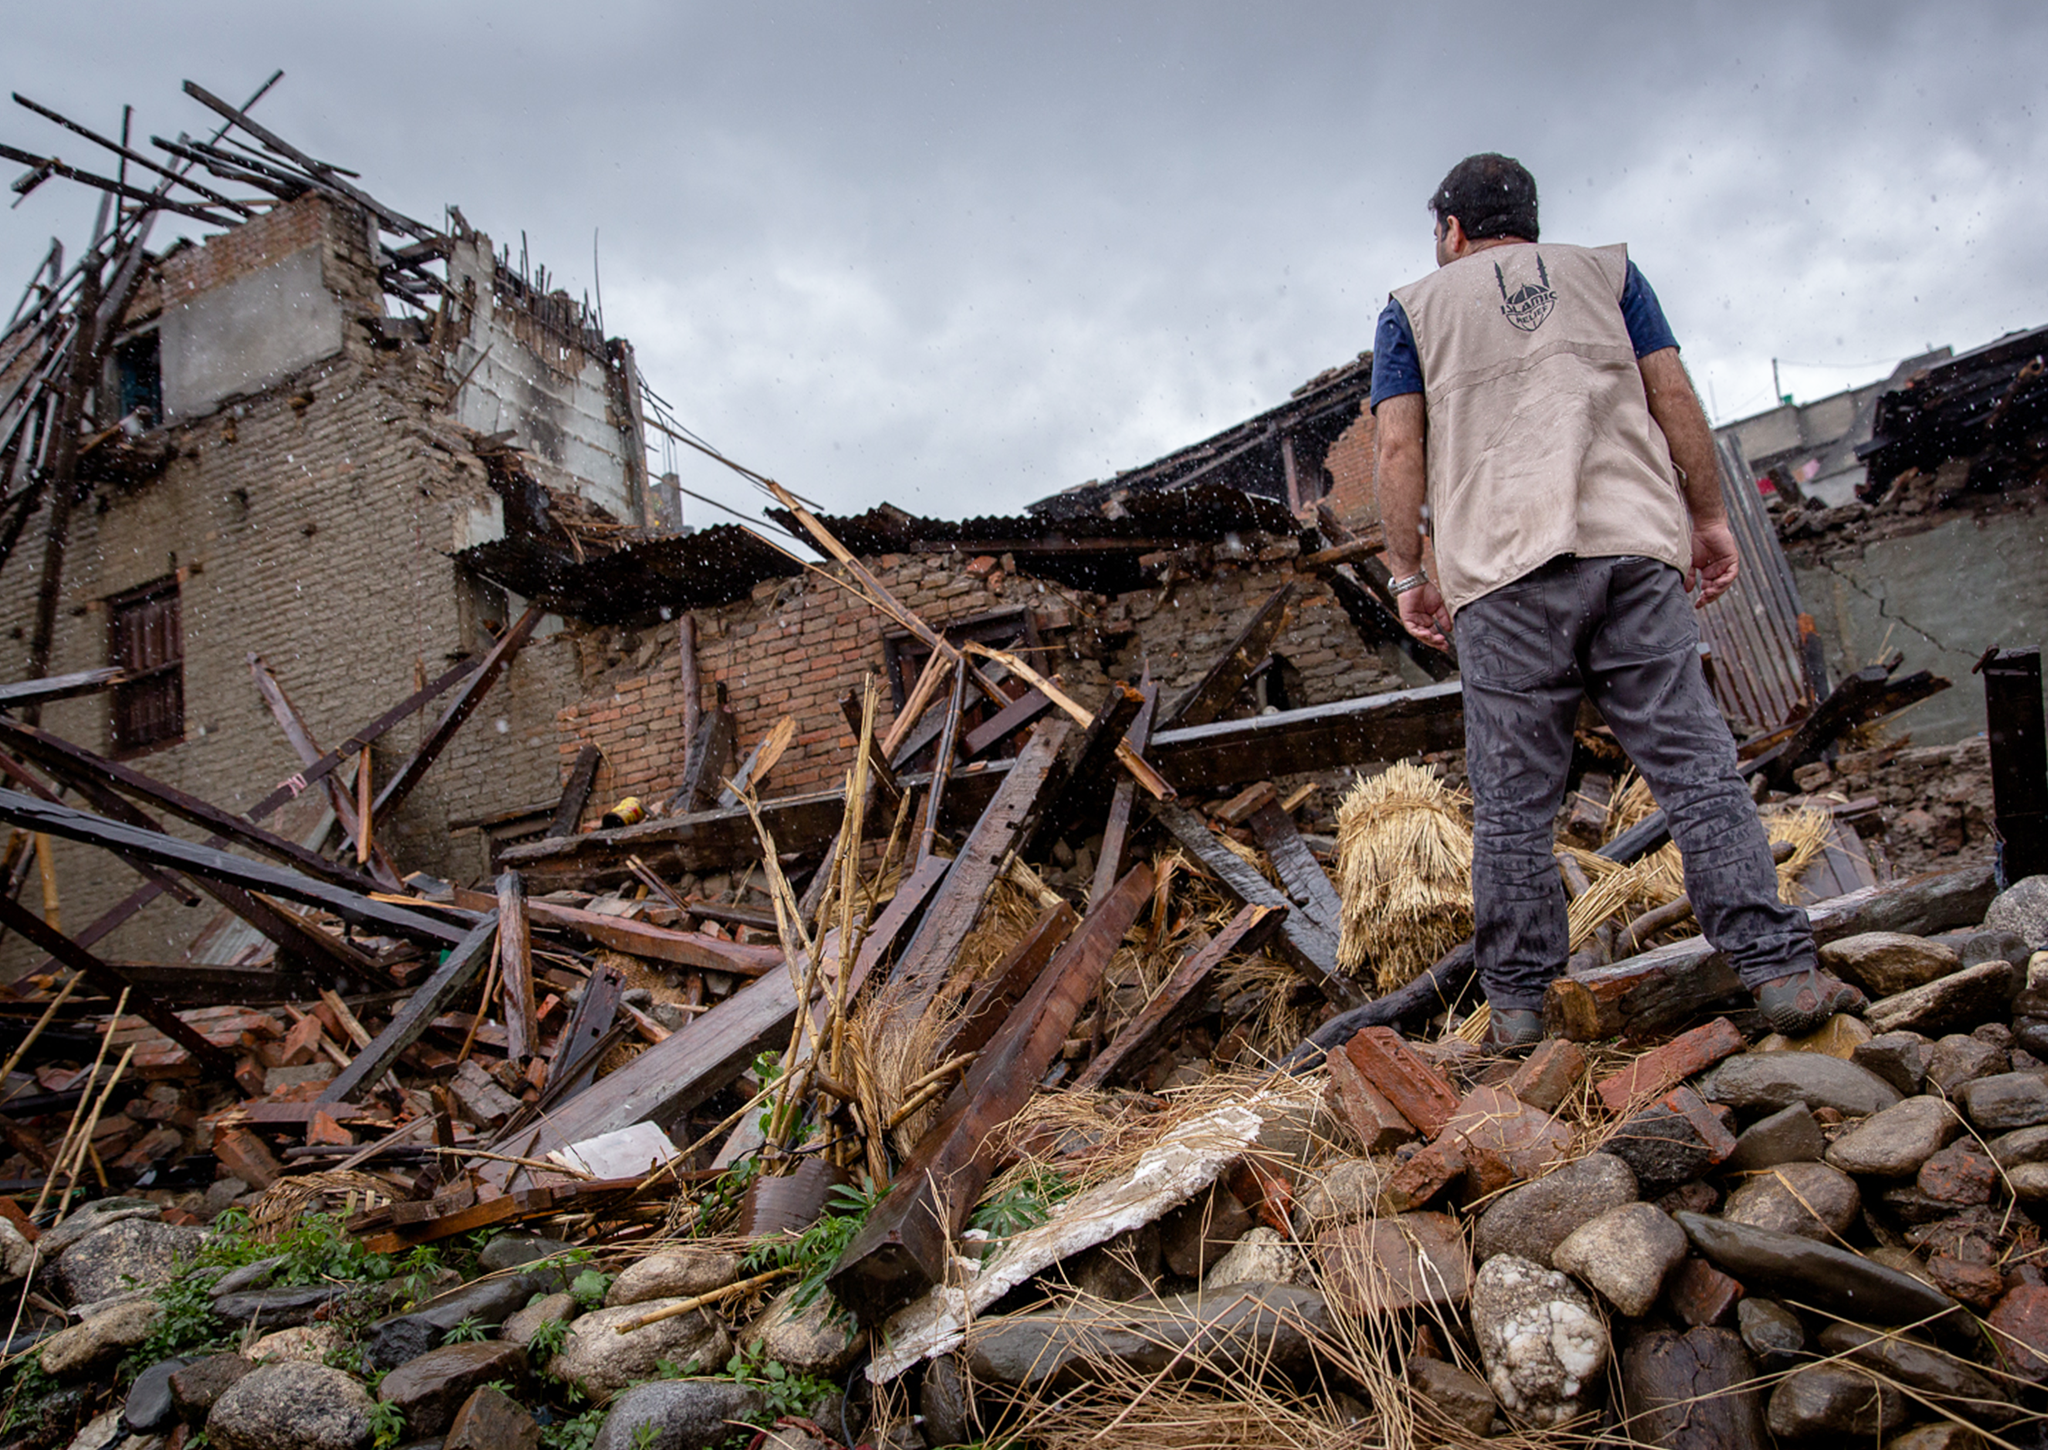 A rescue worker searches among the rubble of one of Nepal's many collapsed buildings